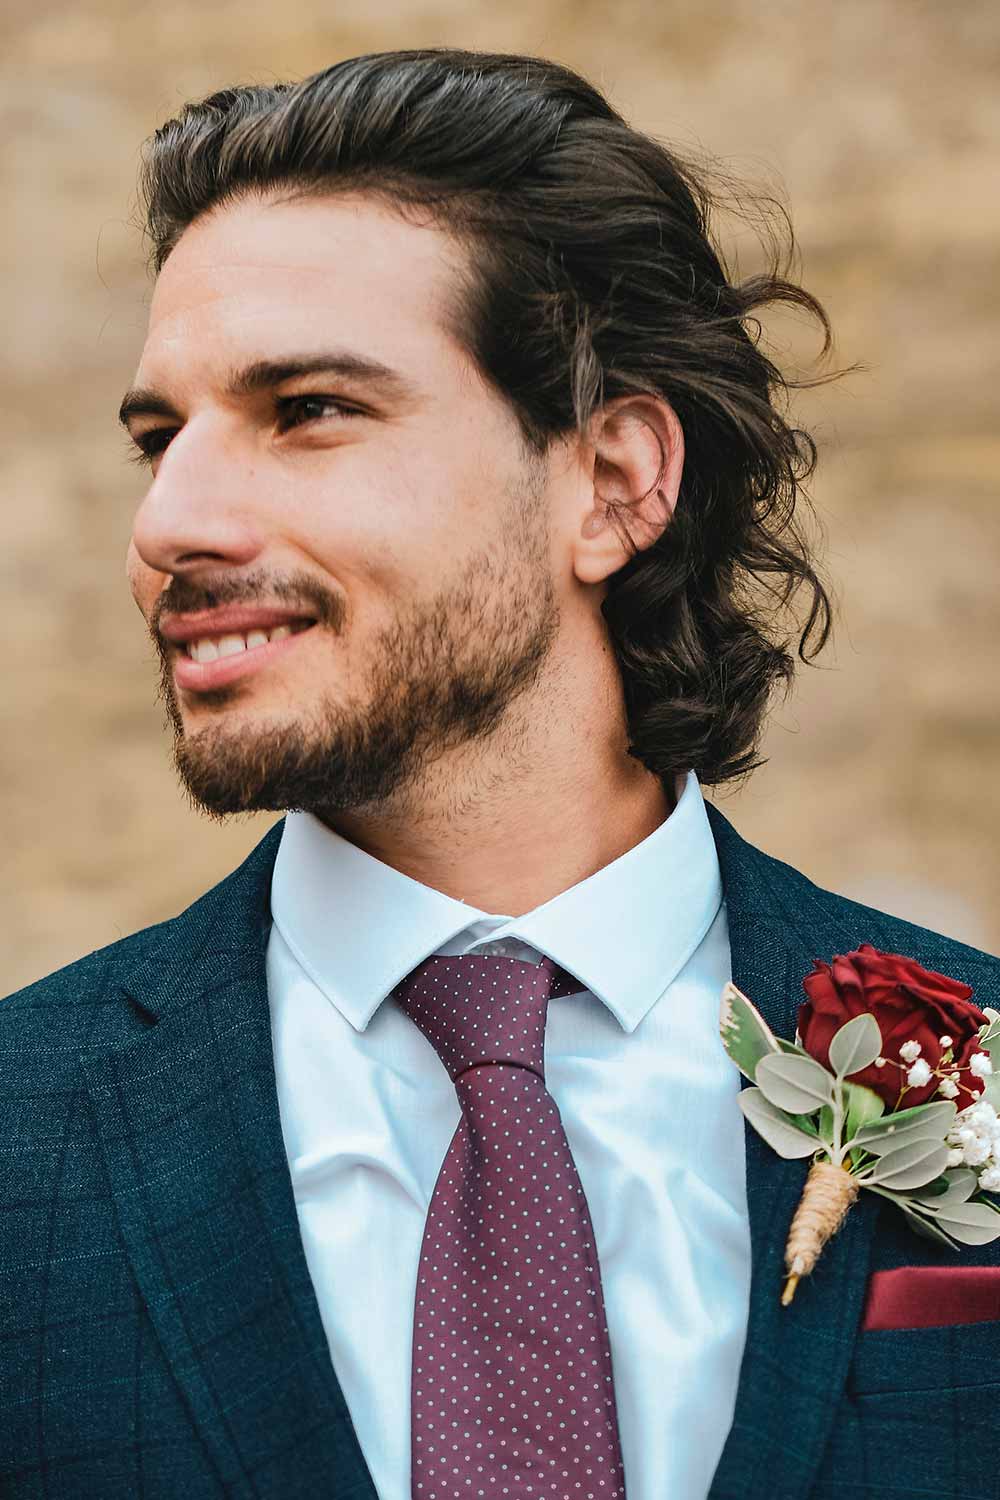 The Selection Of The Most Attractive Wedding Hairstyles | MensHaircuts